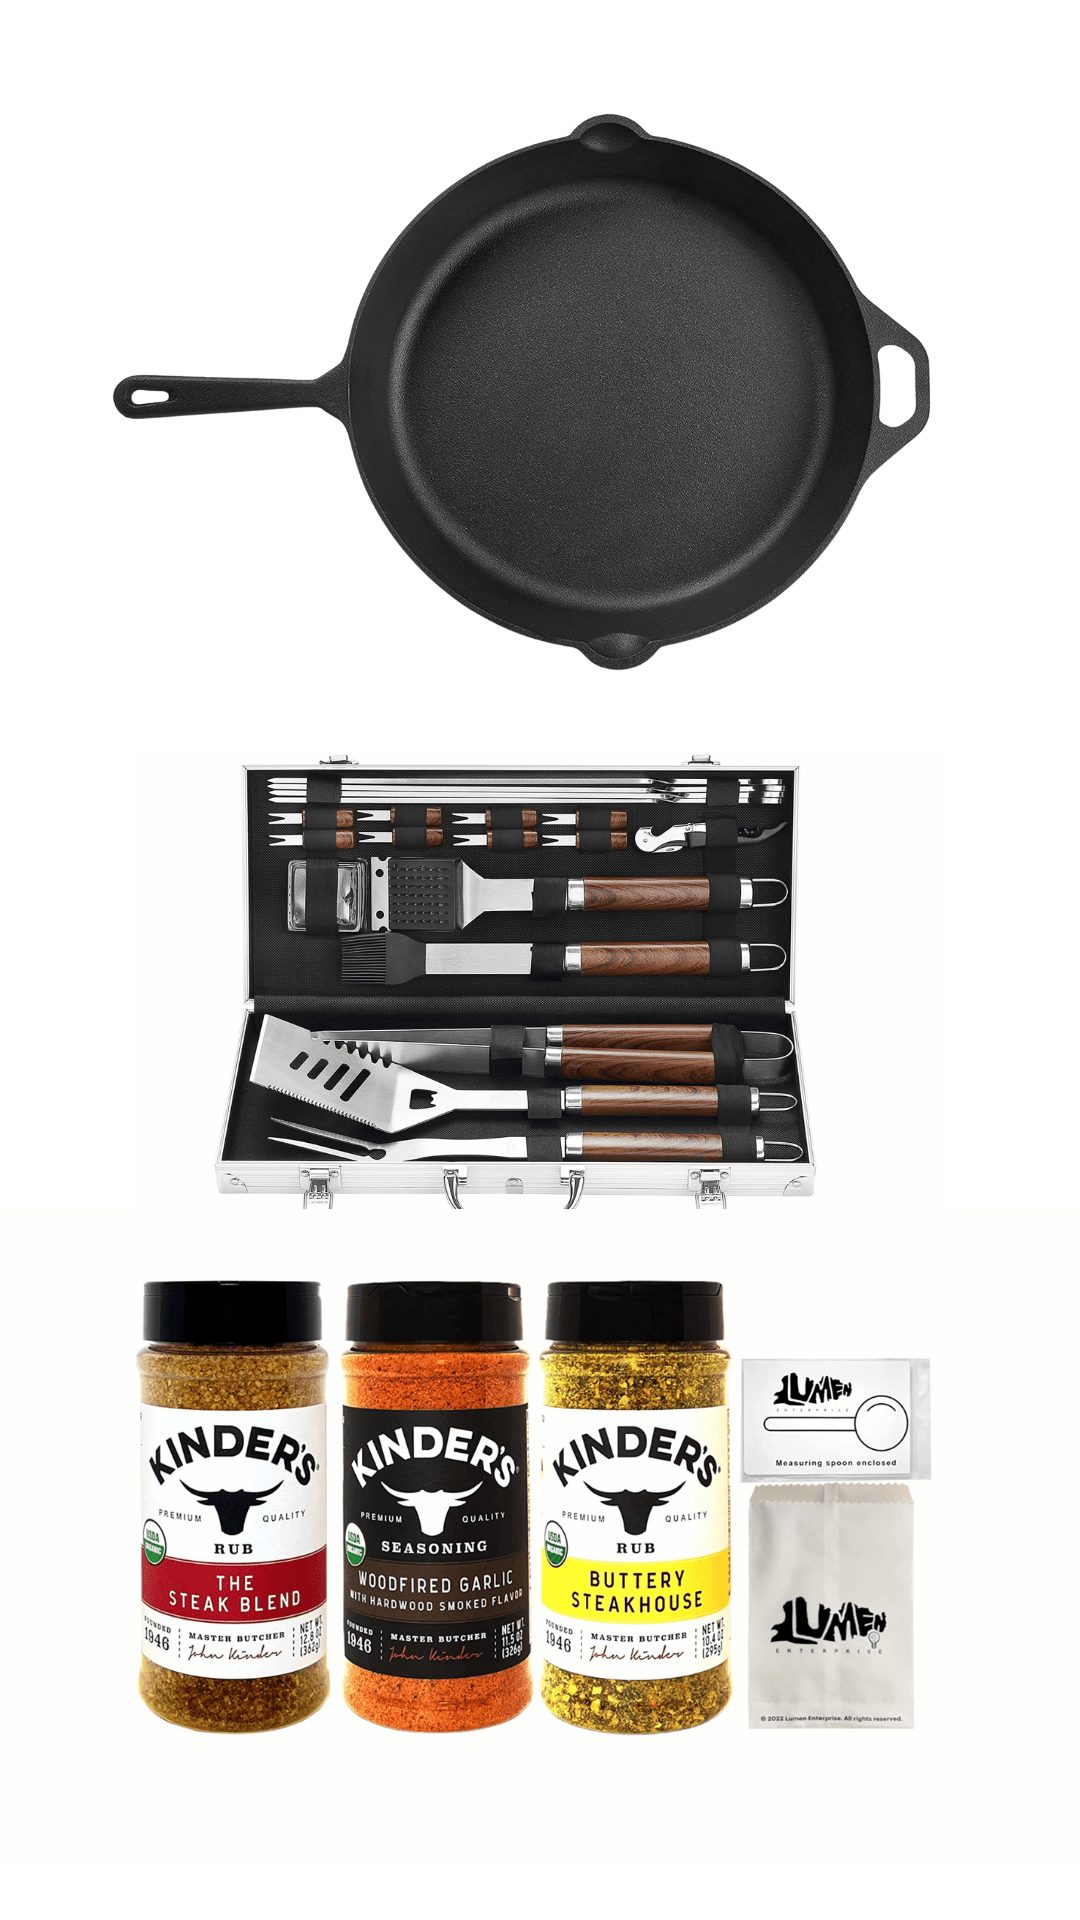 Different cooking utensils, at top a cast iron skillet, in the middle a variety of BBQ accessories, and on the bottom a collection of Kinder's BBQ seasonings